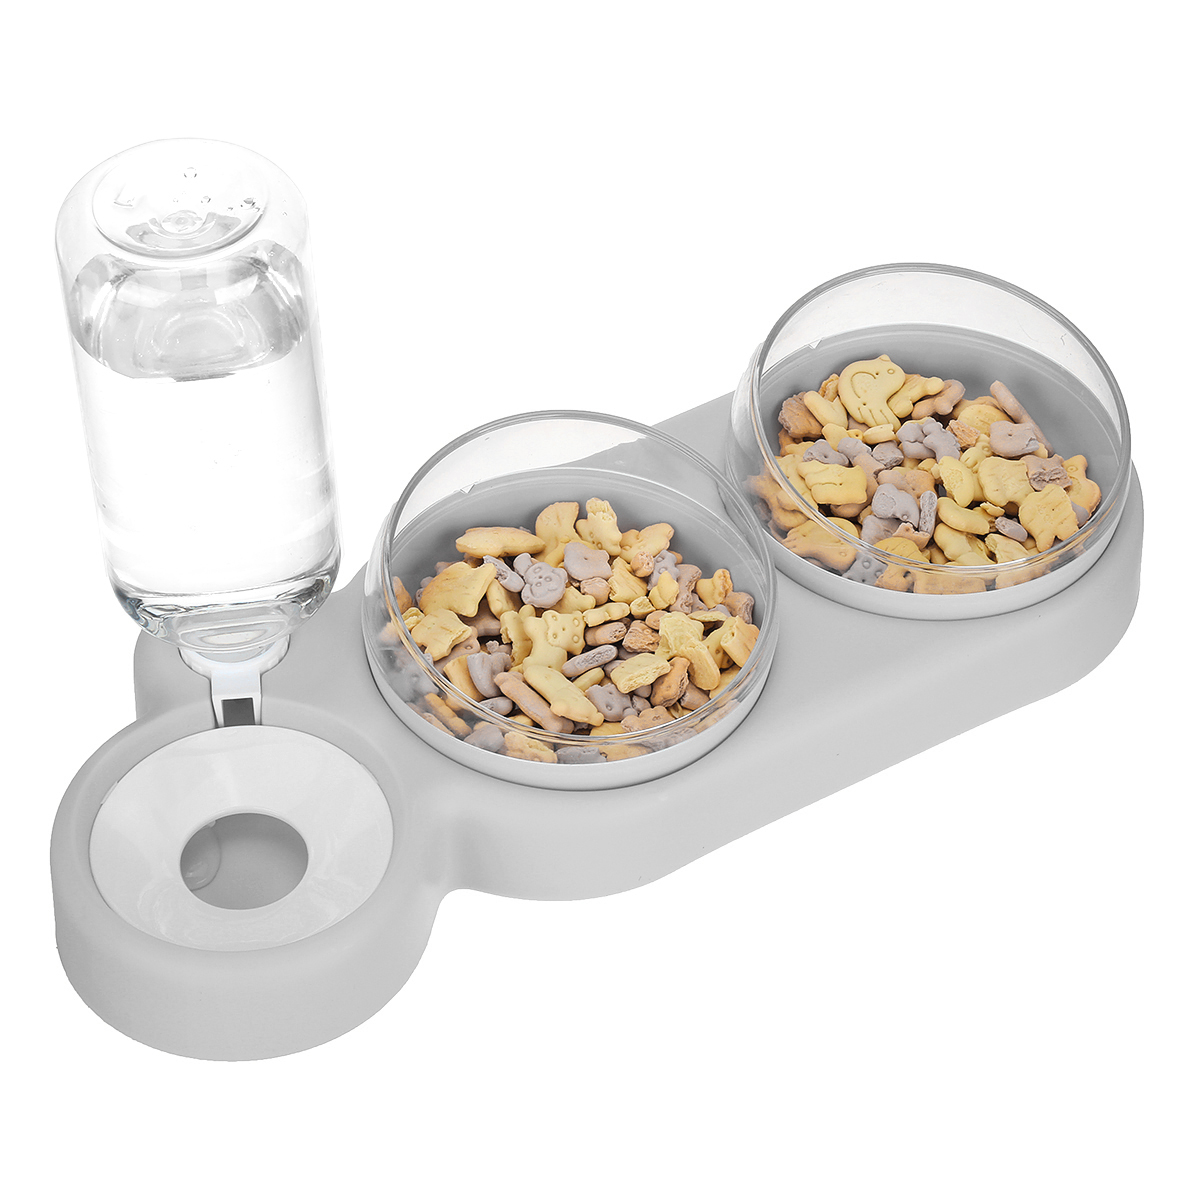 Three-bowl-Design-Pet-Feeder-Dry-and-Wet-Separation-15-Degree-Tilt-Automatic-Anti-wetting-Large-Capa-1852271-28